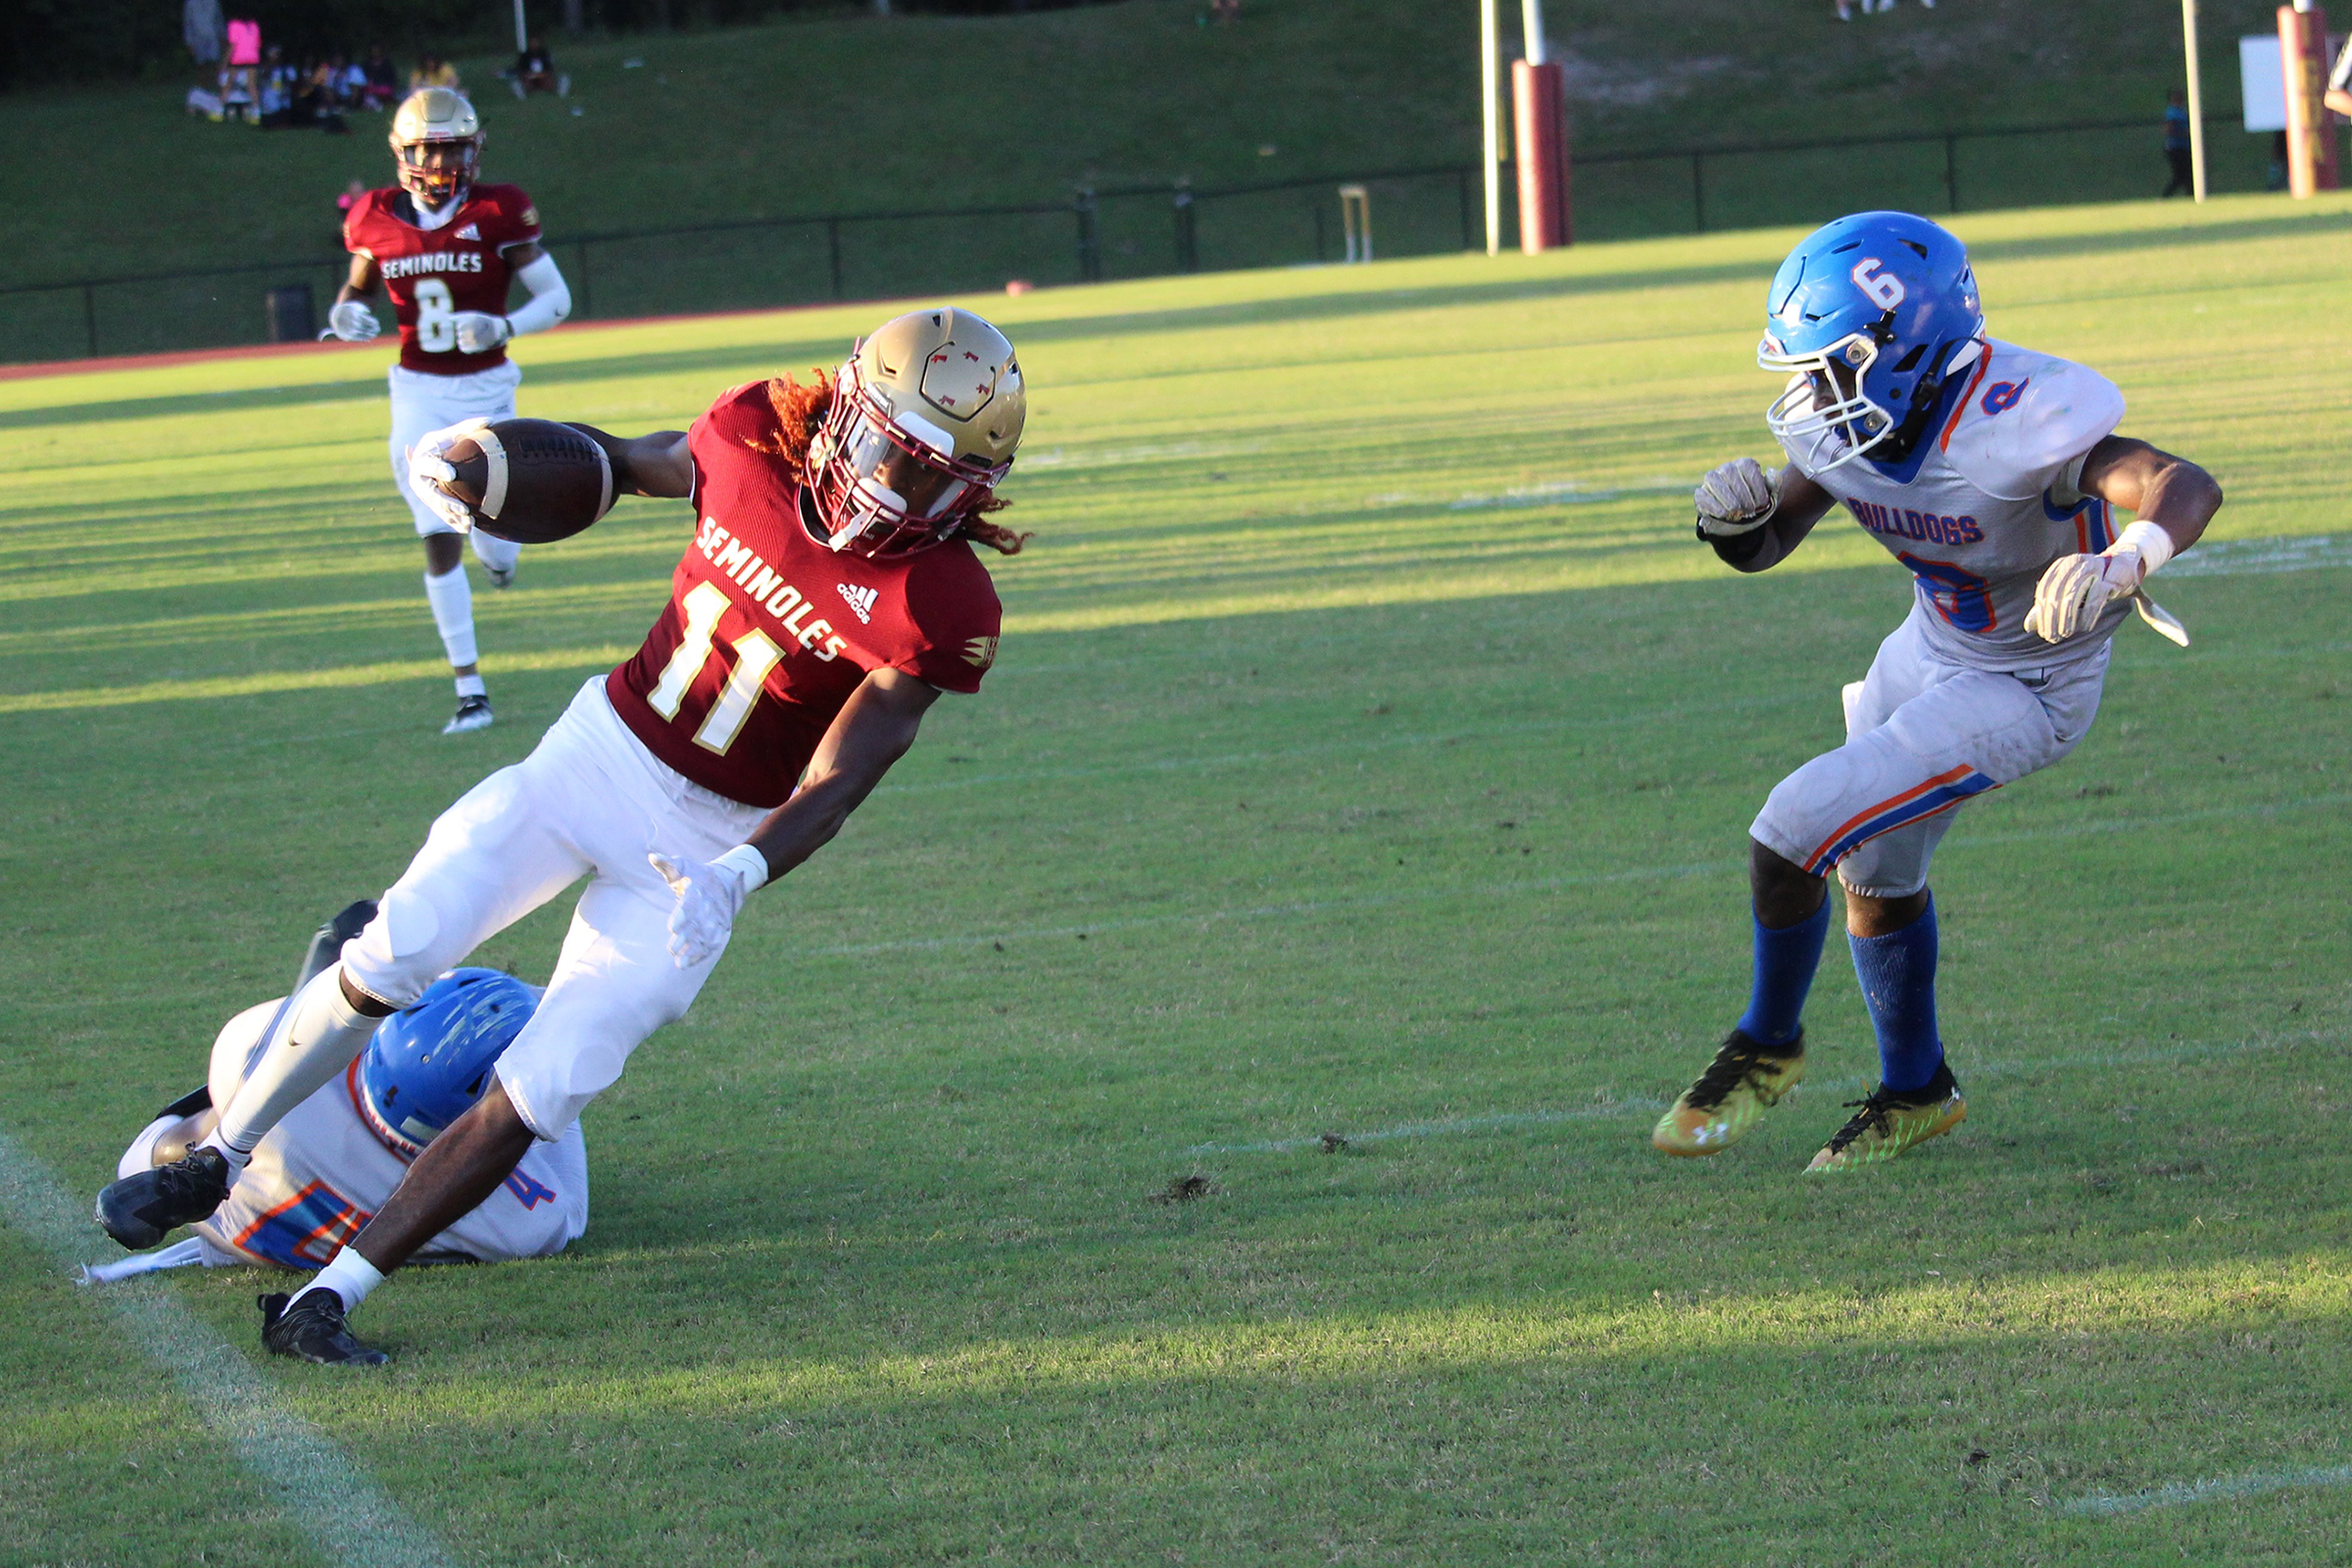 Noles Double as Dog Catchers and Pound Taylor County in One Sided Affair